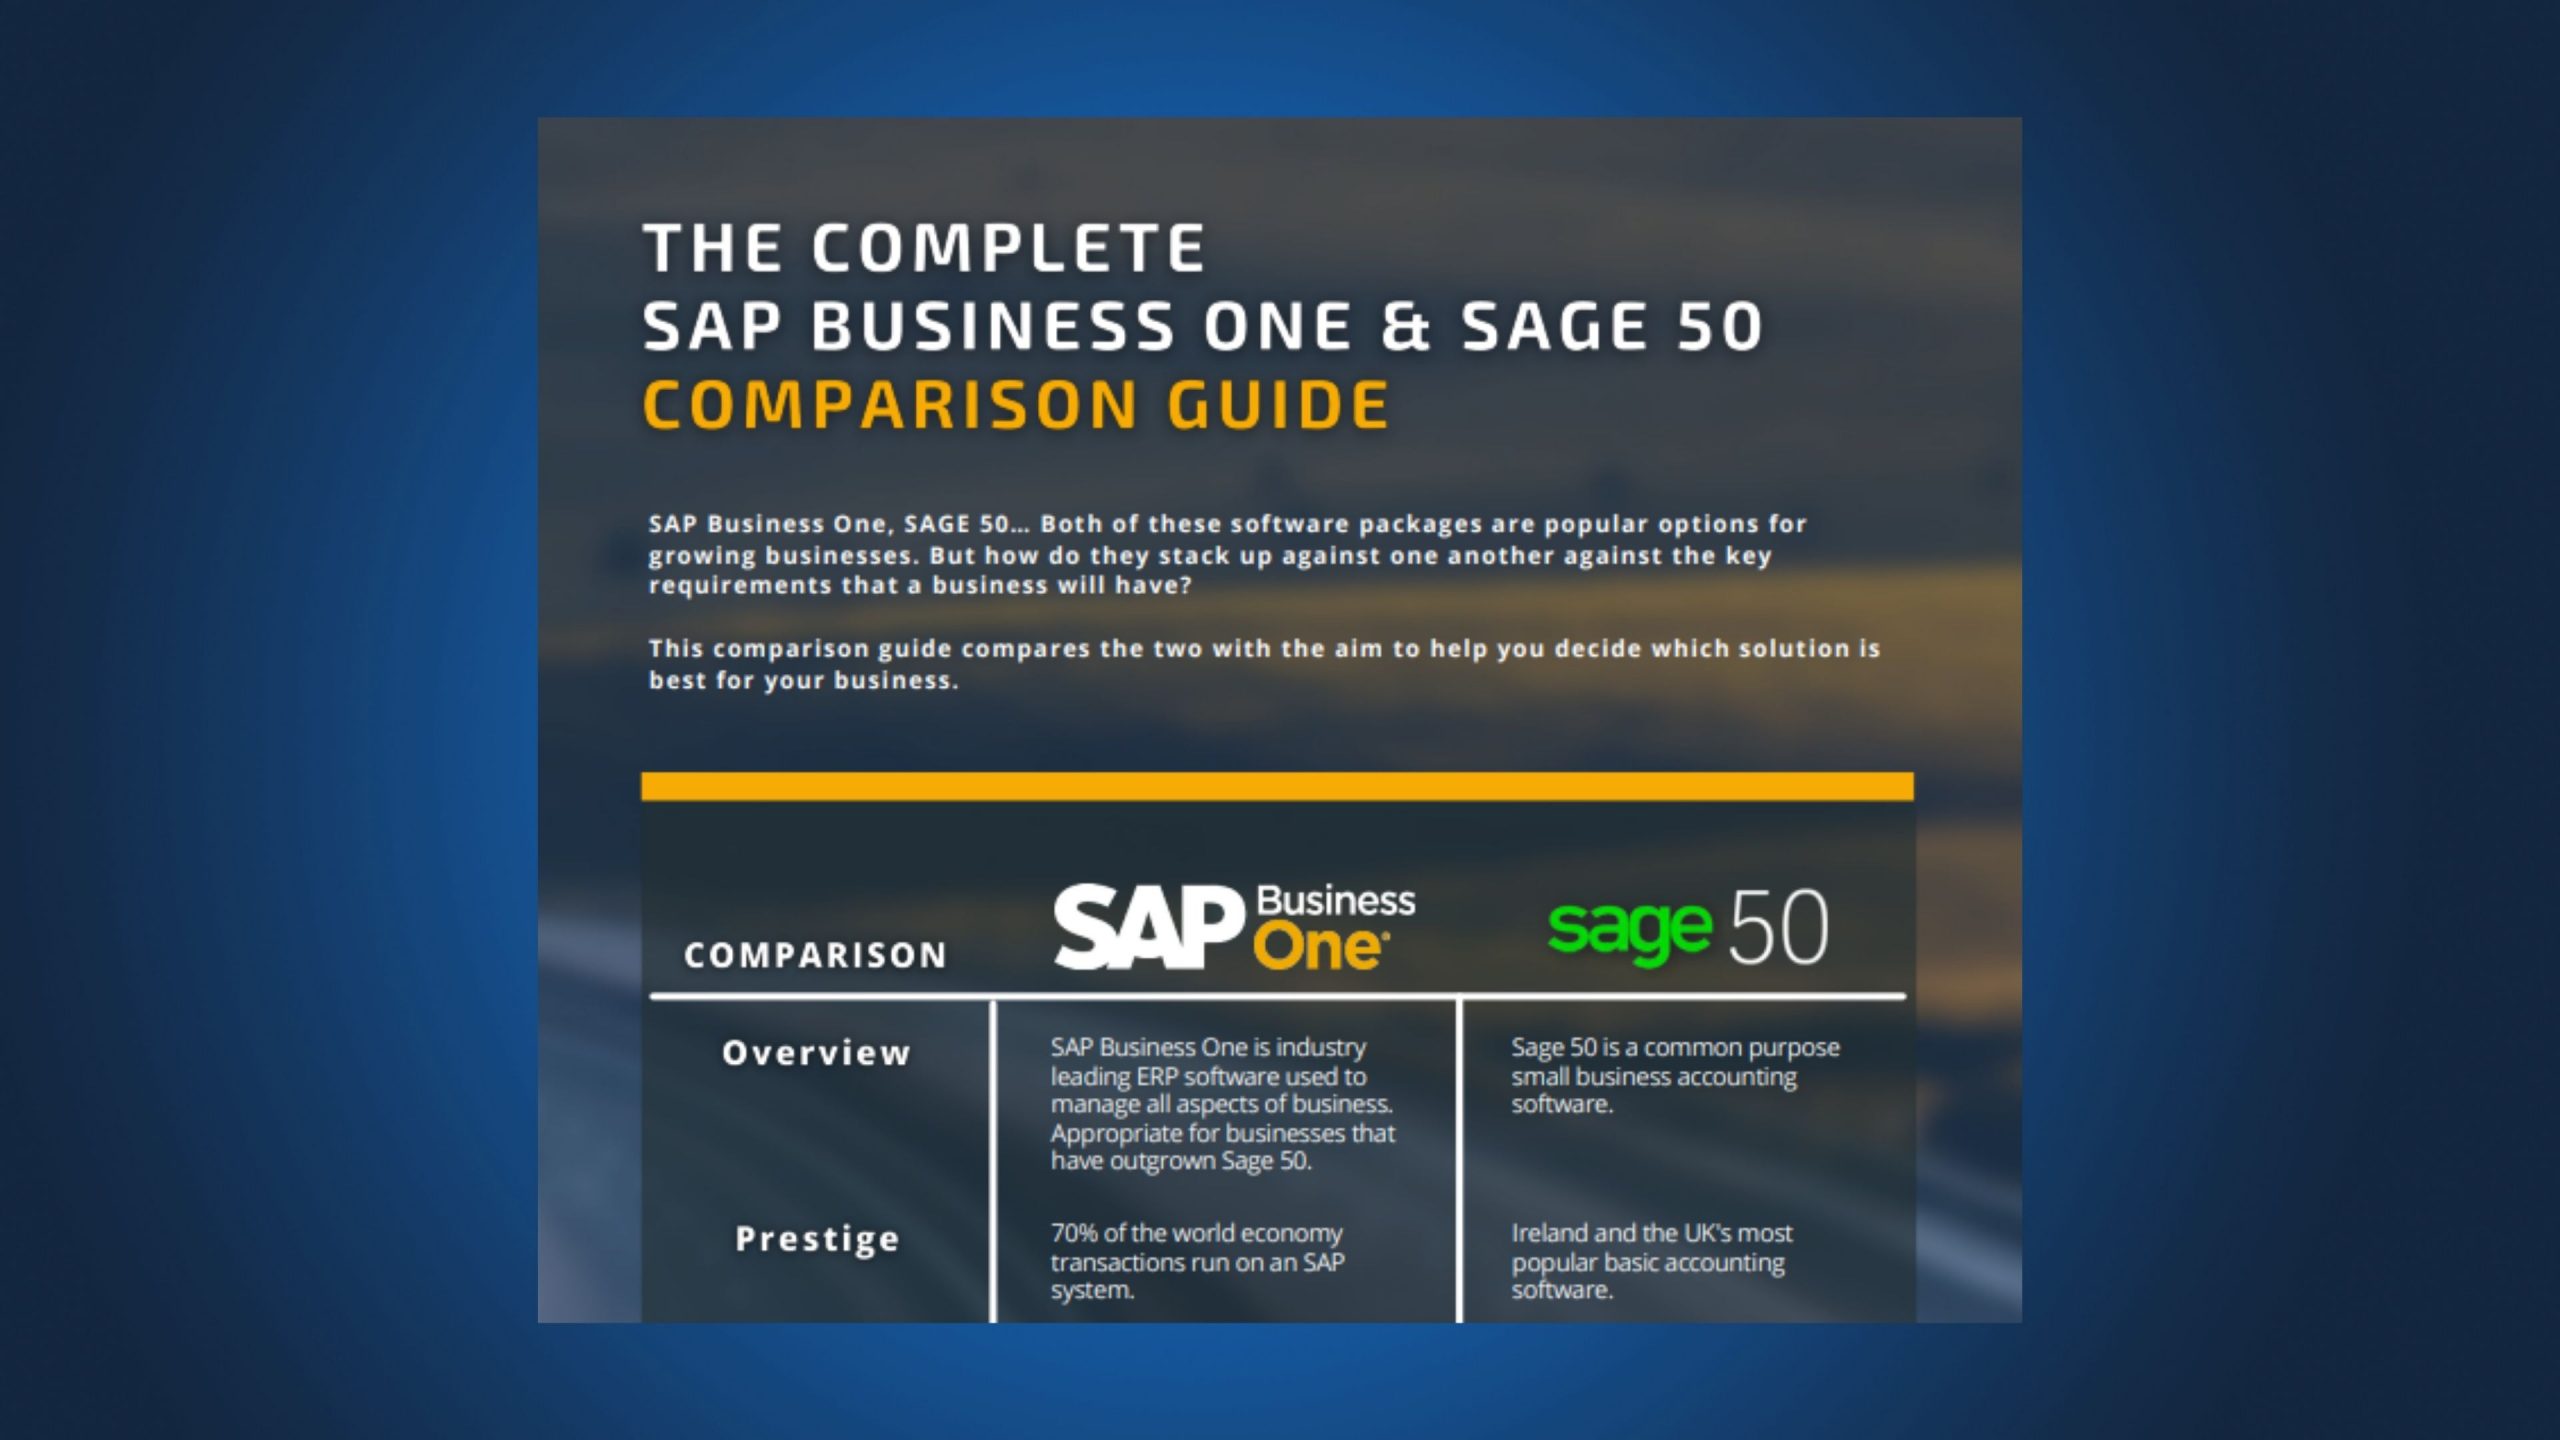 The Complete SAP Business One & Sage 50 Comparison Guide